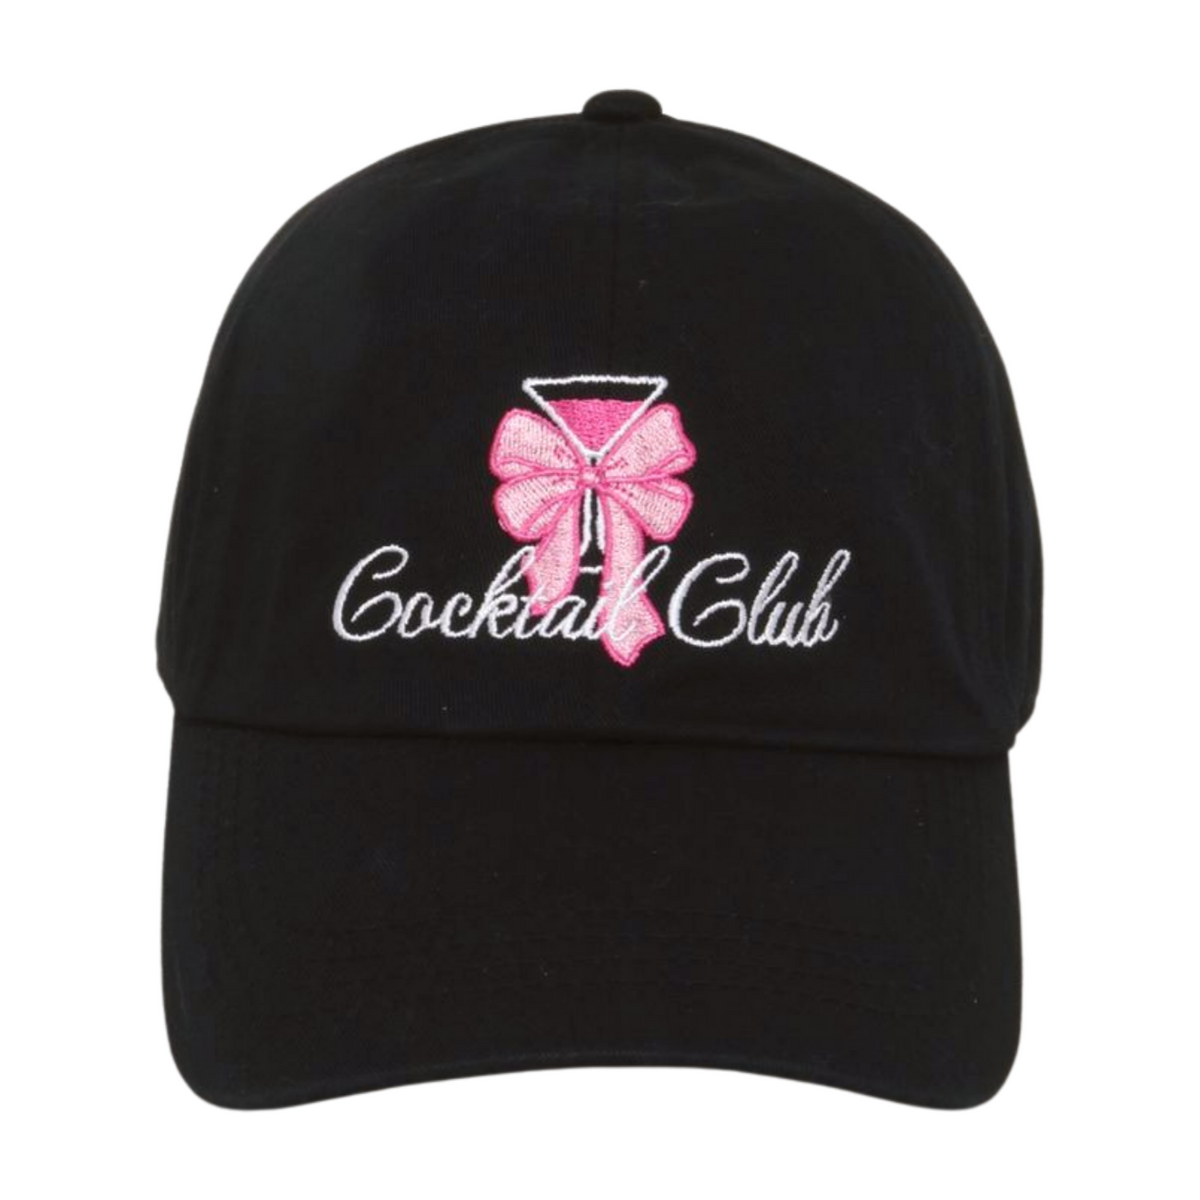 LCAP3628 - COCKTAIL CLUB EMBROIDERED BASEBALL CAP